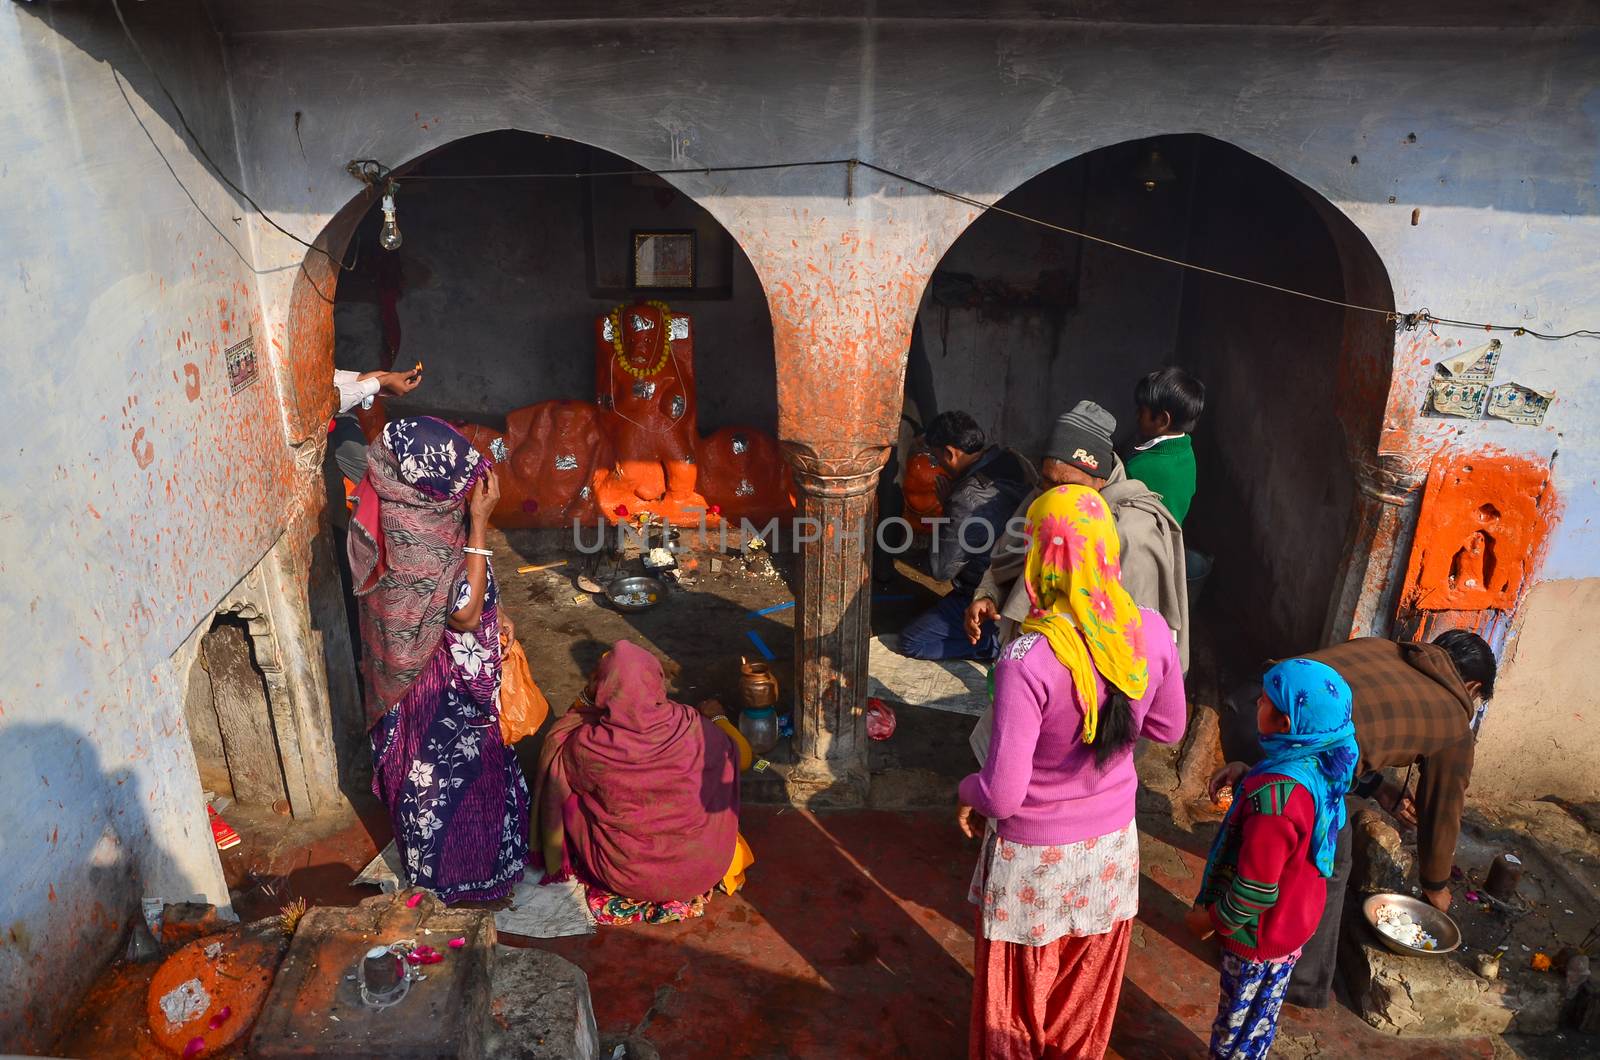 Jaipur, India - December 30, 2014: Unknown indian people live in Chand Baori Stepwell, Jaipur, Rajasthan, India on December 30, 2014.